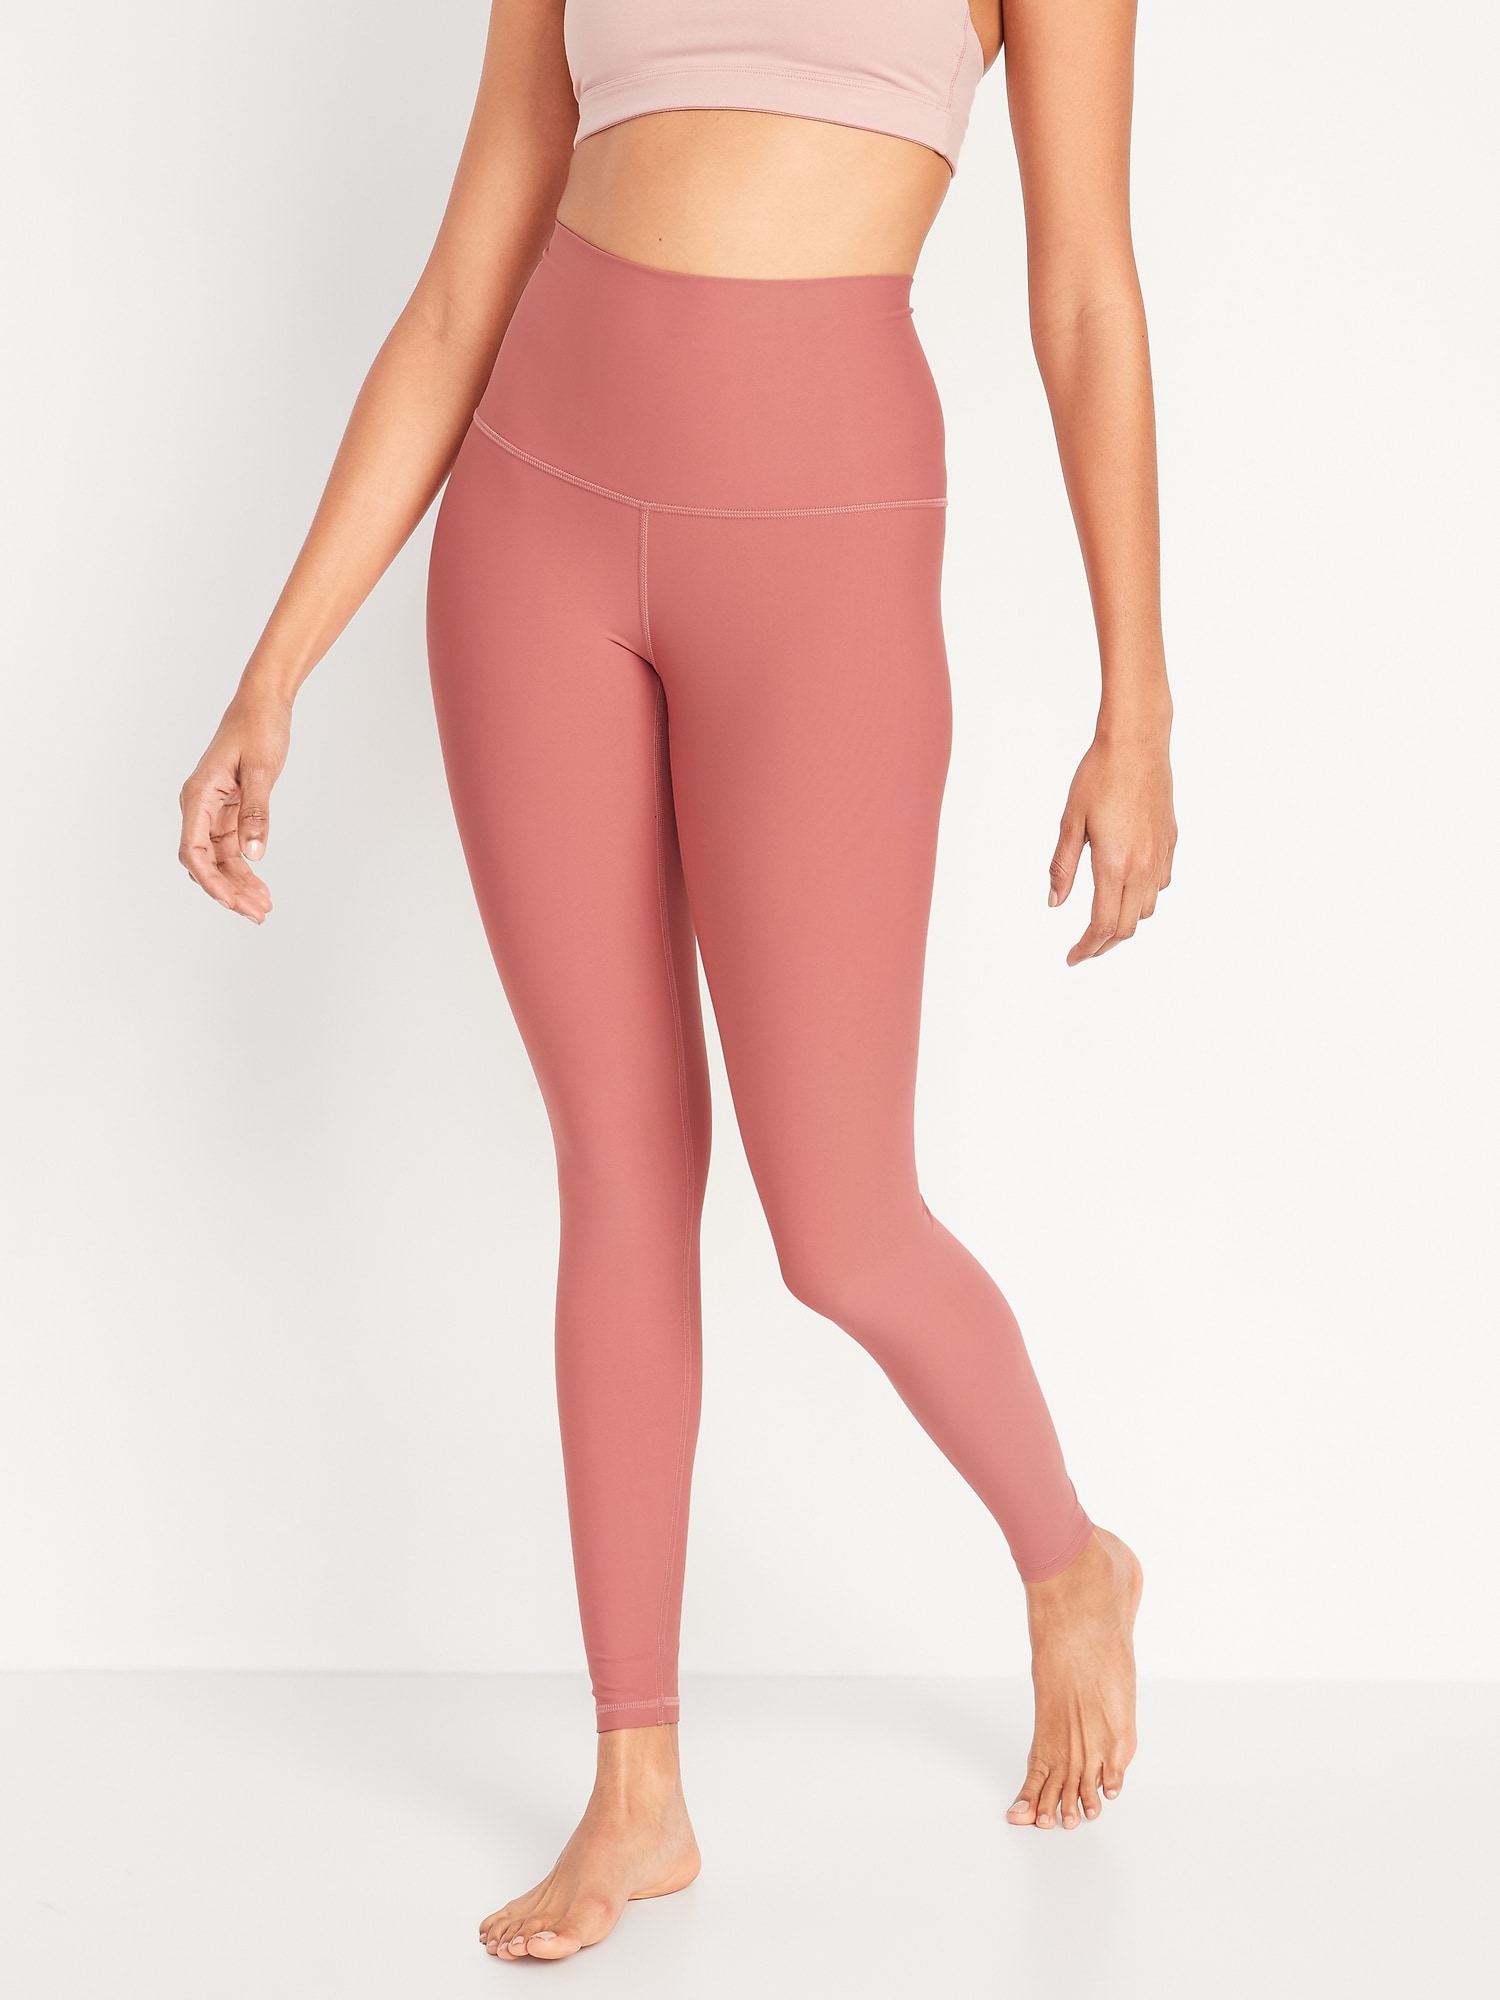 Old Navy Extra High-Waisted PowerSoft Light Compression Hddn